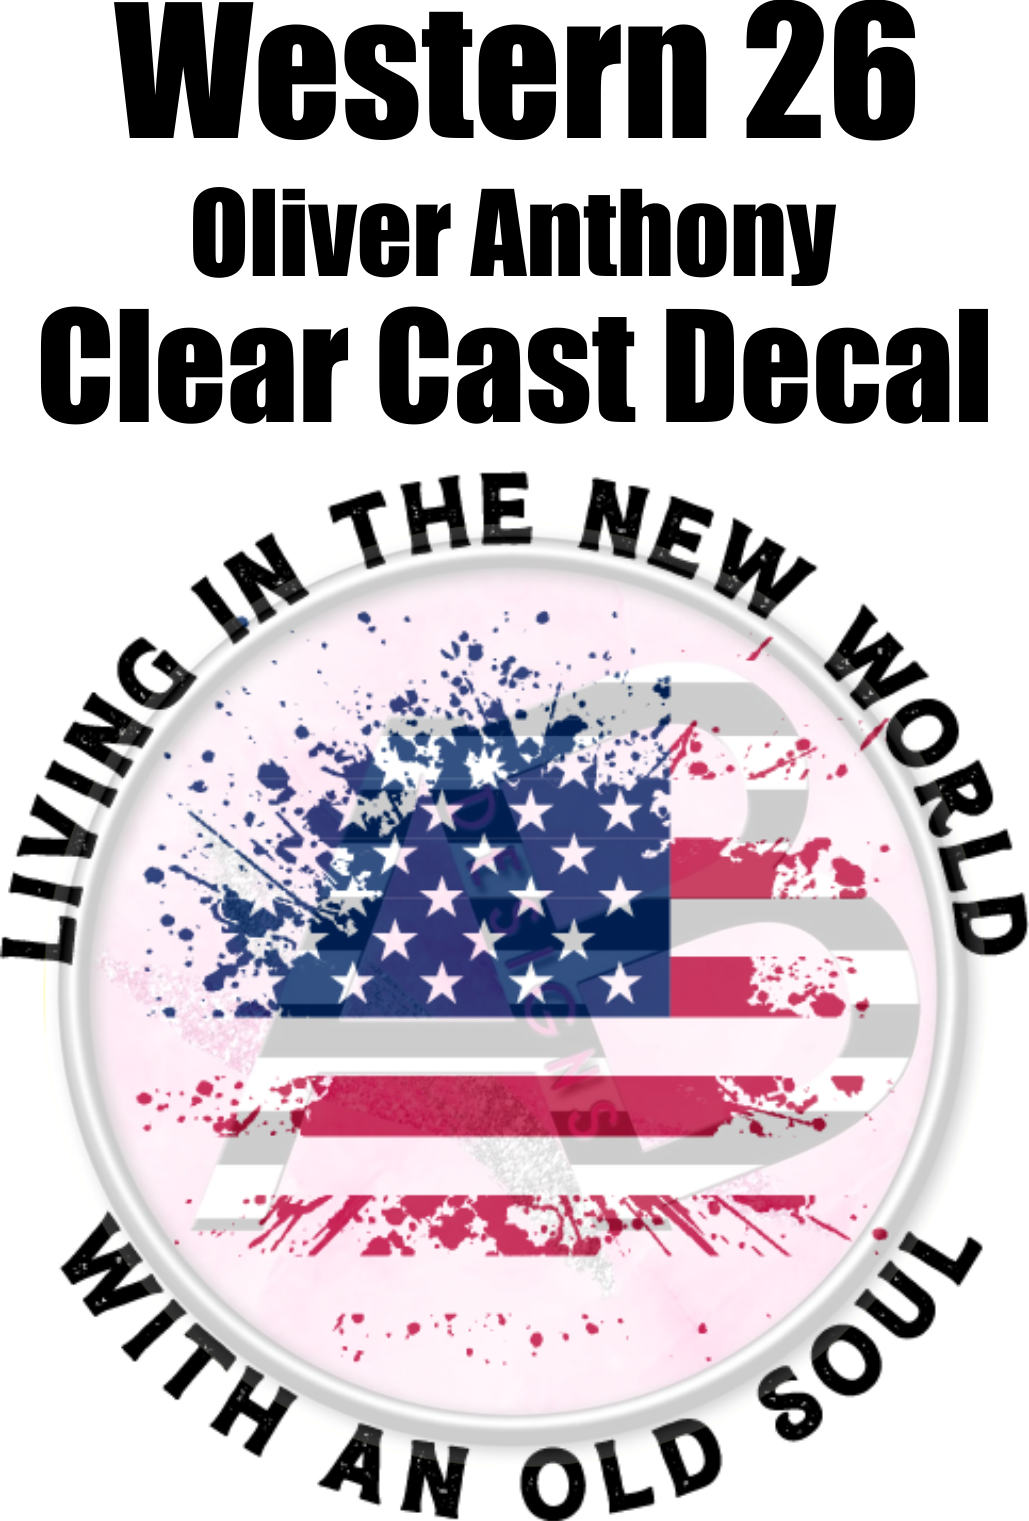 Western 26 - Clear Cast Decal - Oliver Anthony - 143